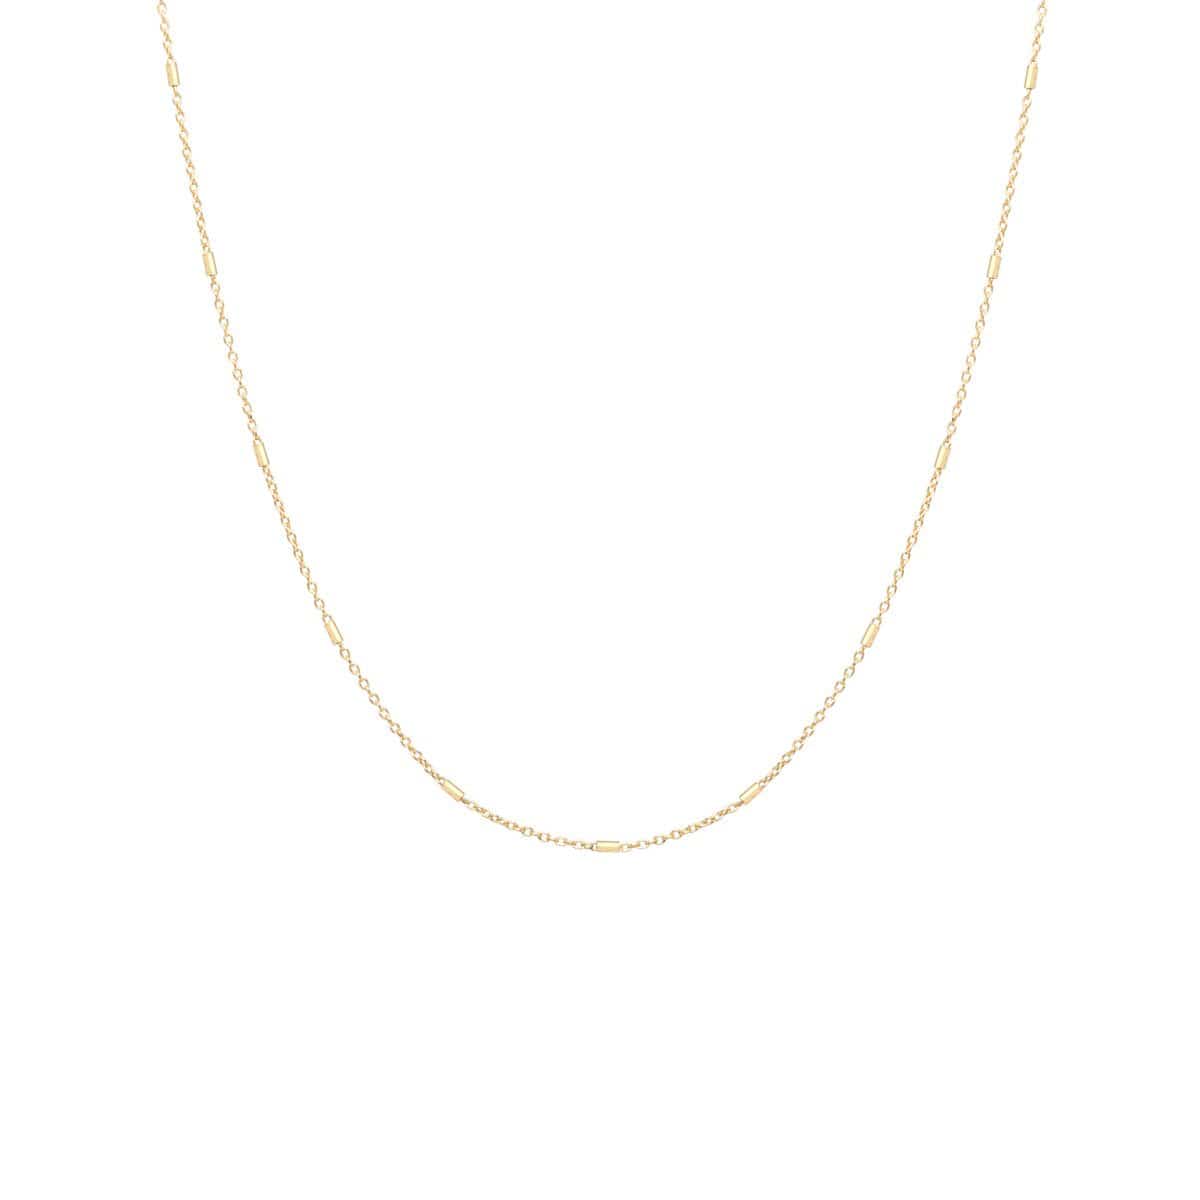 CHN-14K 24" 14K Gold Tiny Bar Cable Chain Necklace